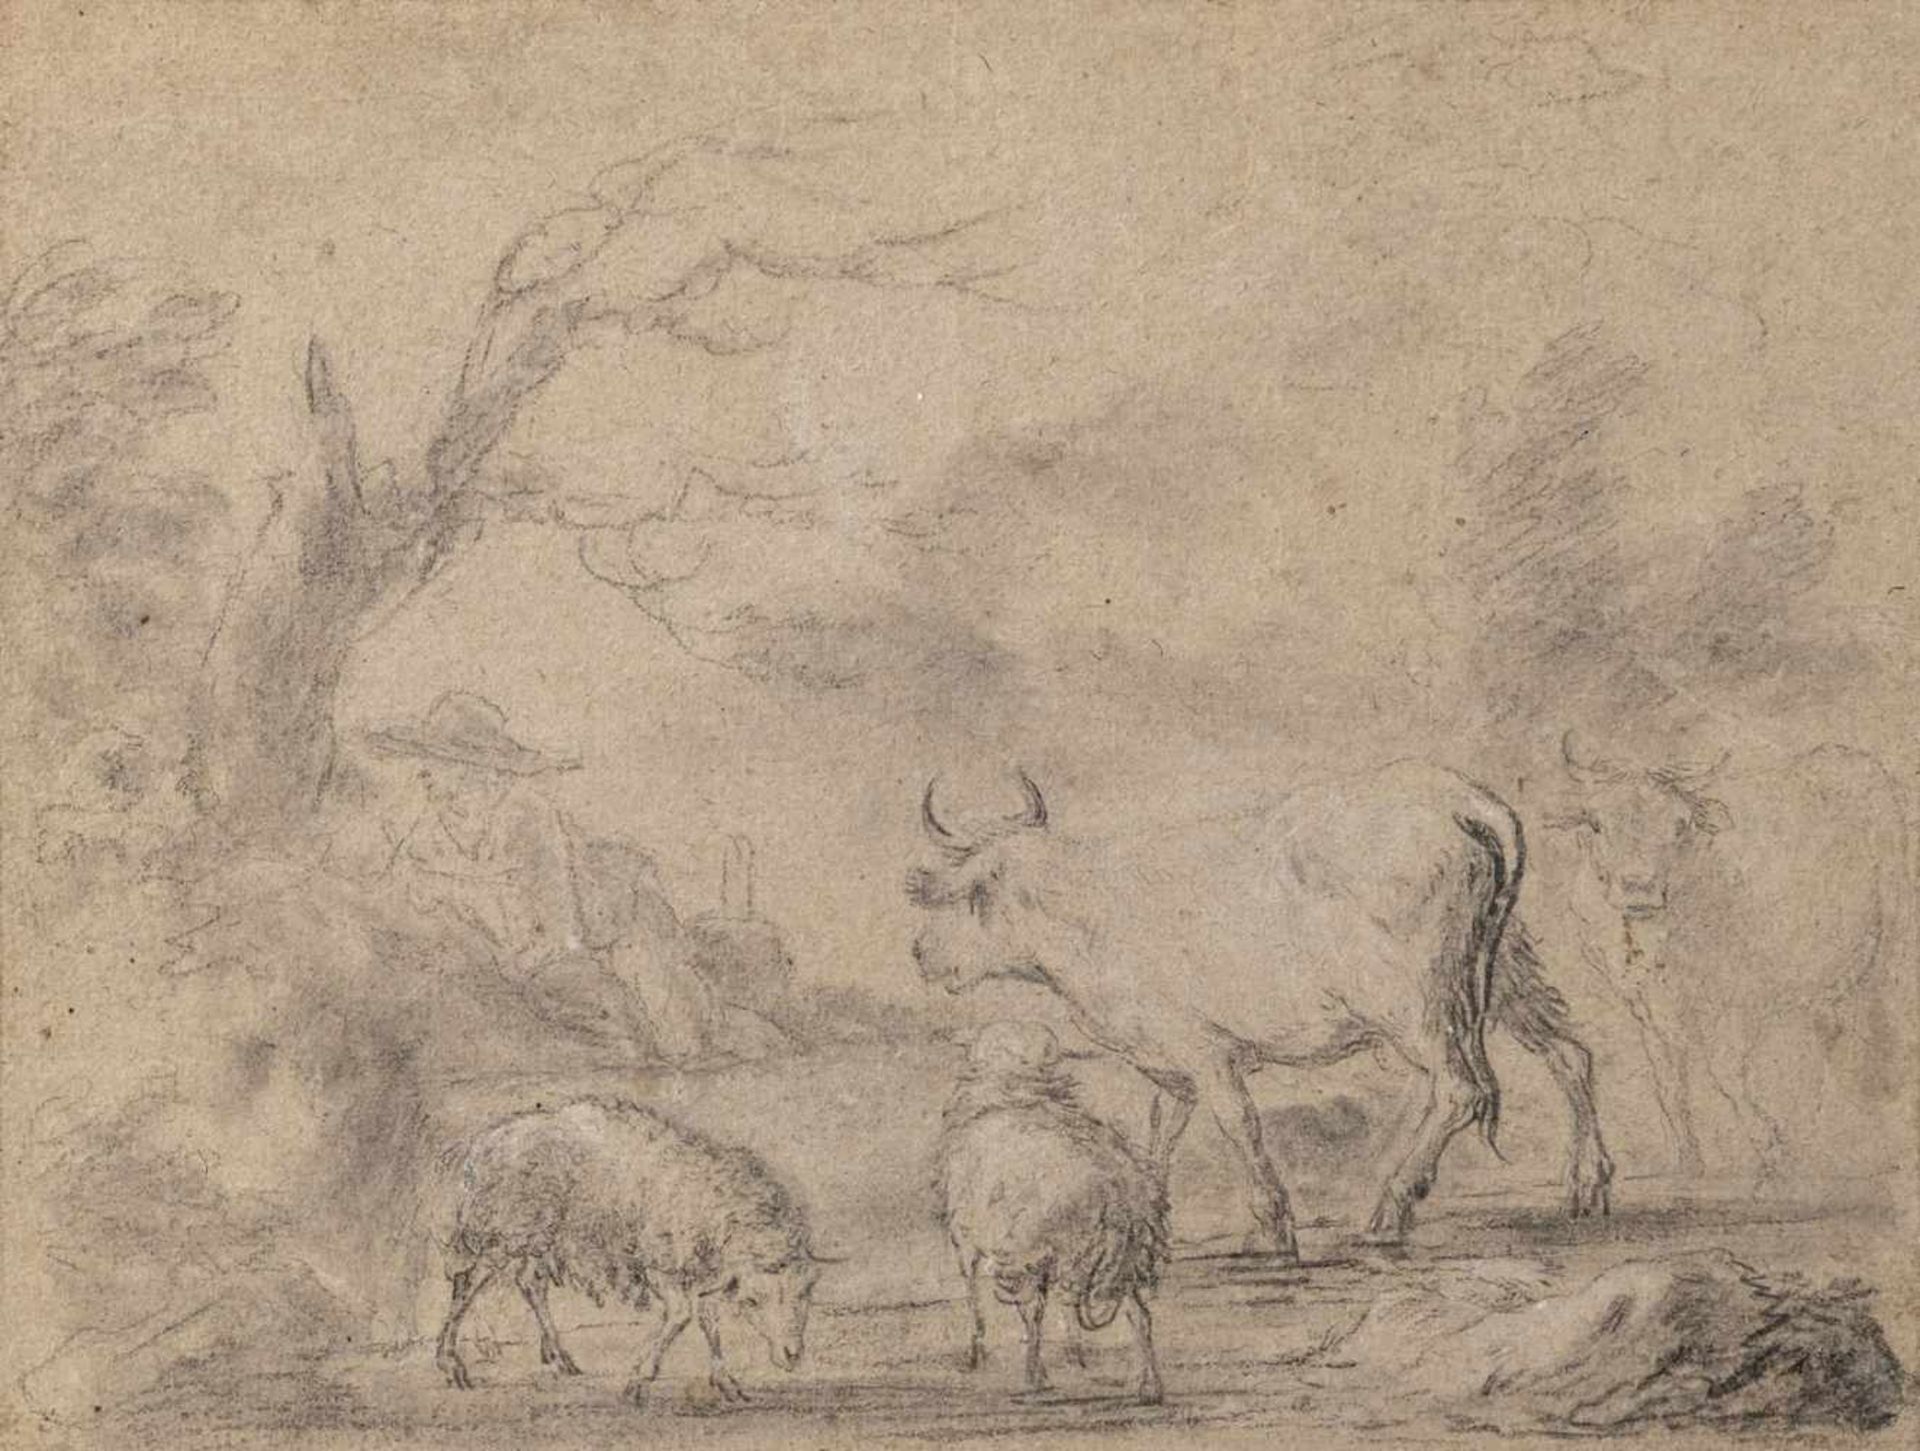 BERCHEM, NICOLAES (follower, 1620-1683). A herdsman with cows and sheep. Black chalk/paper,